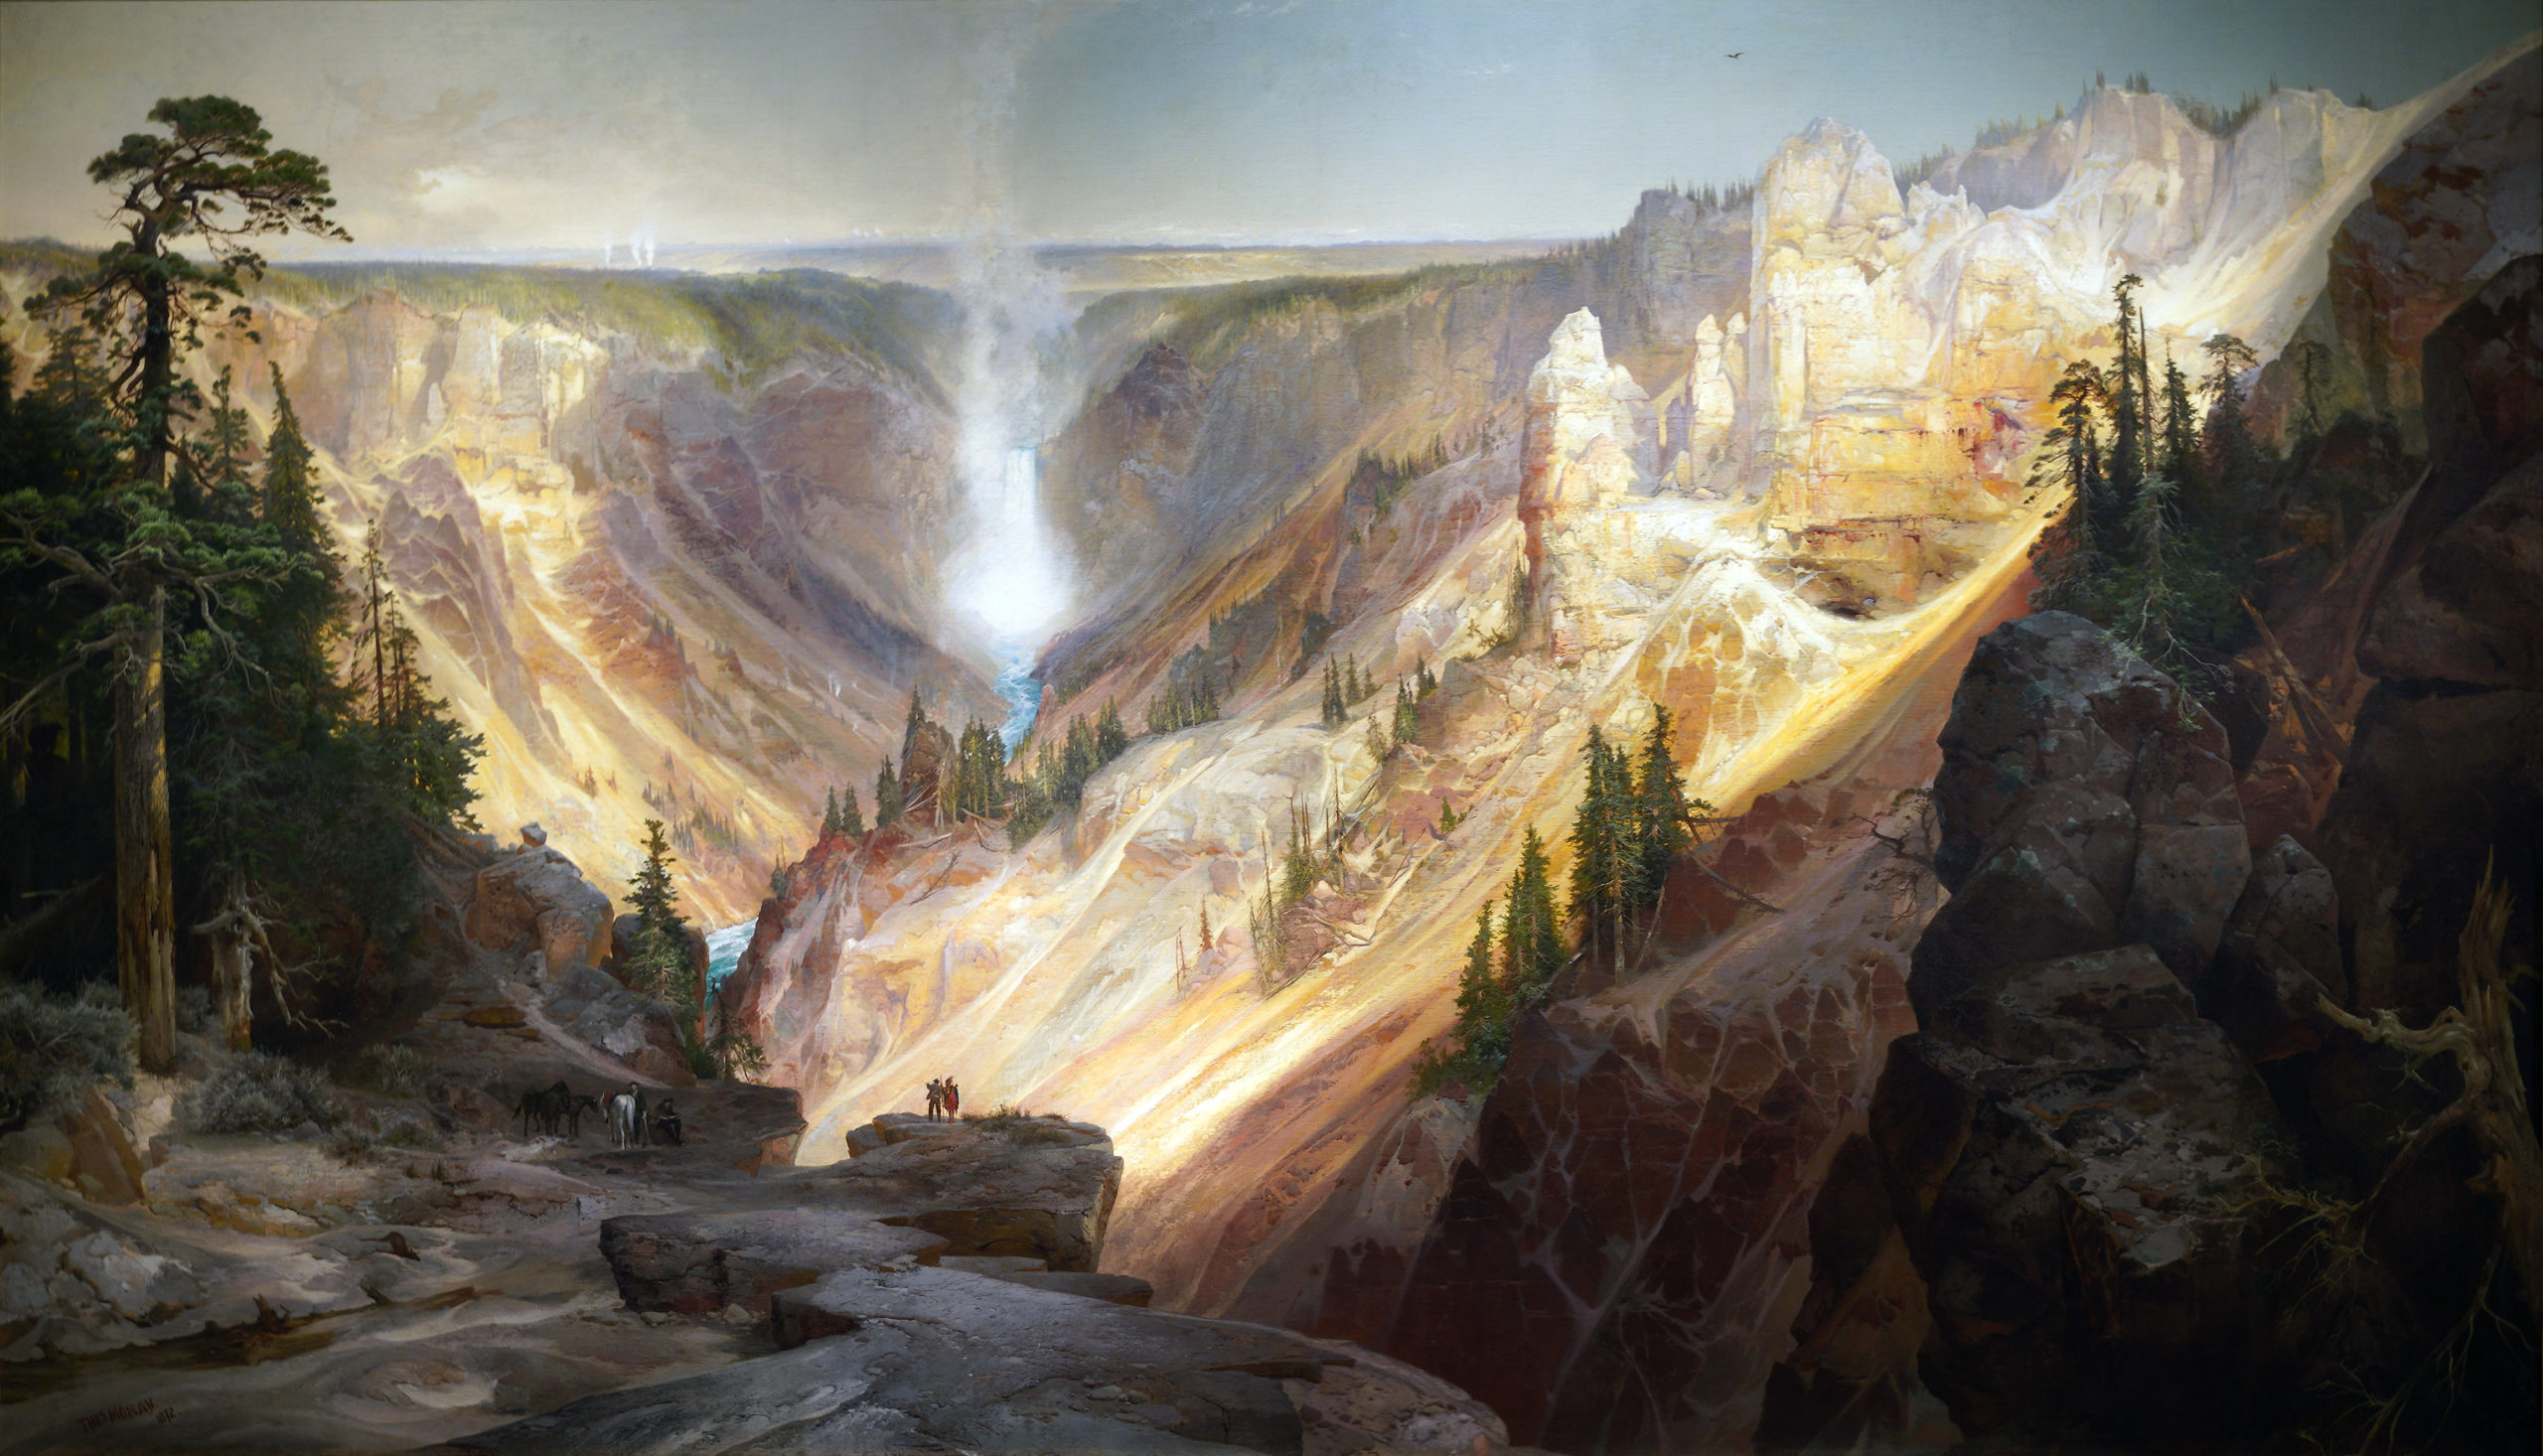 Thomas Moran, Grand Canyon of the Yellowstone, 1872, oil on canvas mounted on aluminum, 213 x 266.3 cm, Smithsonian American Art Museum (photo: Steven Zucker, CC BY-NC-SA 2.0)